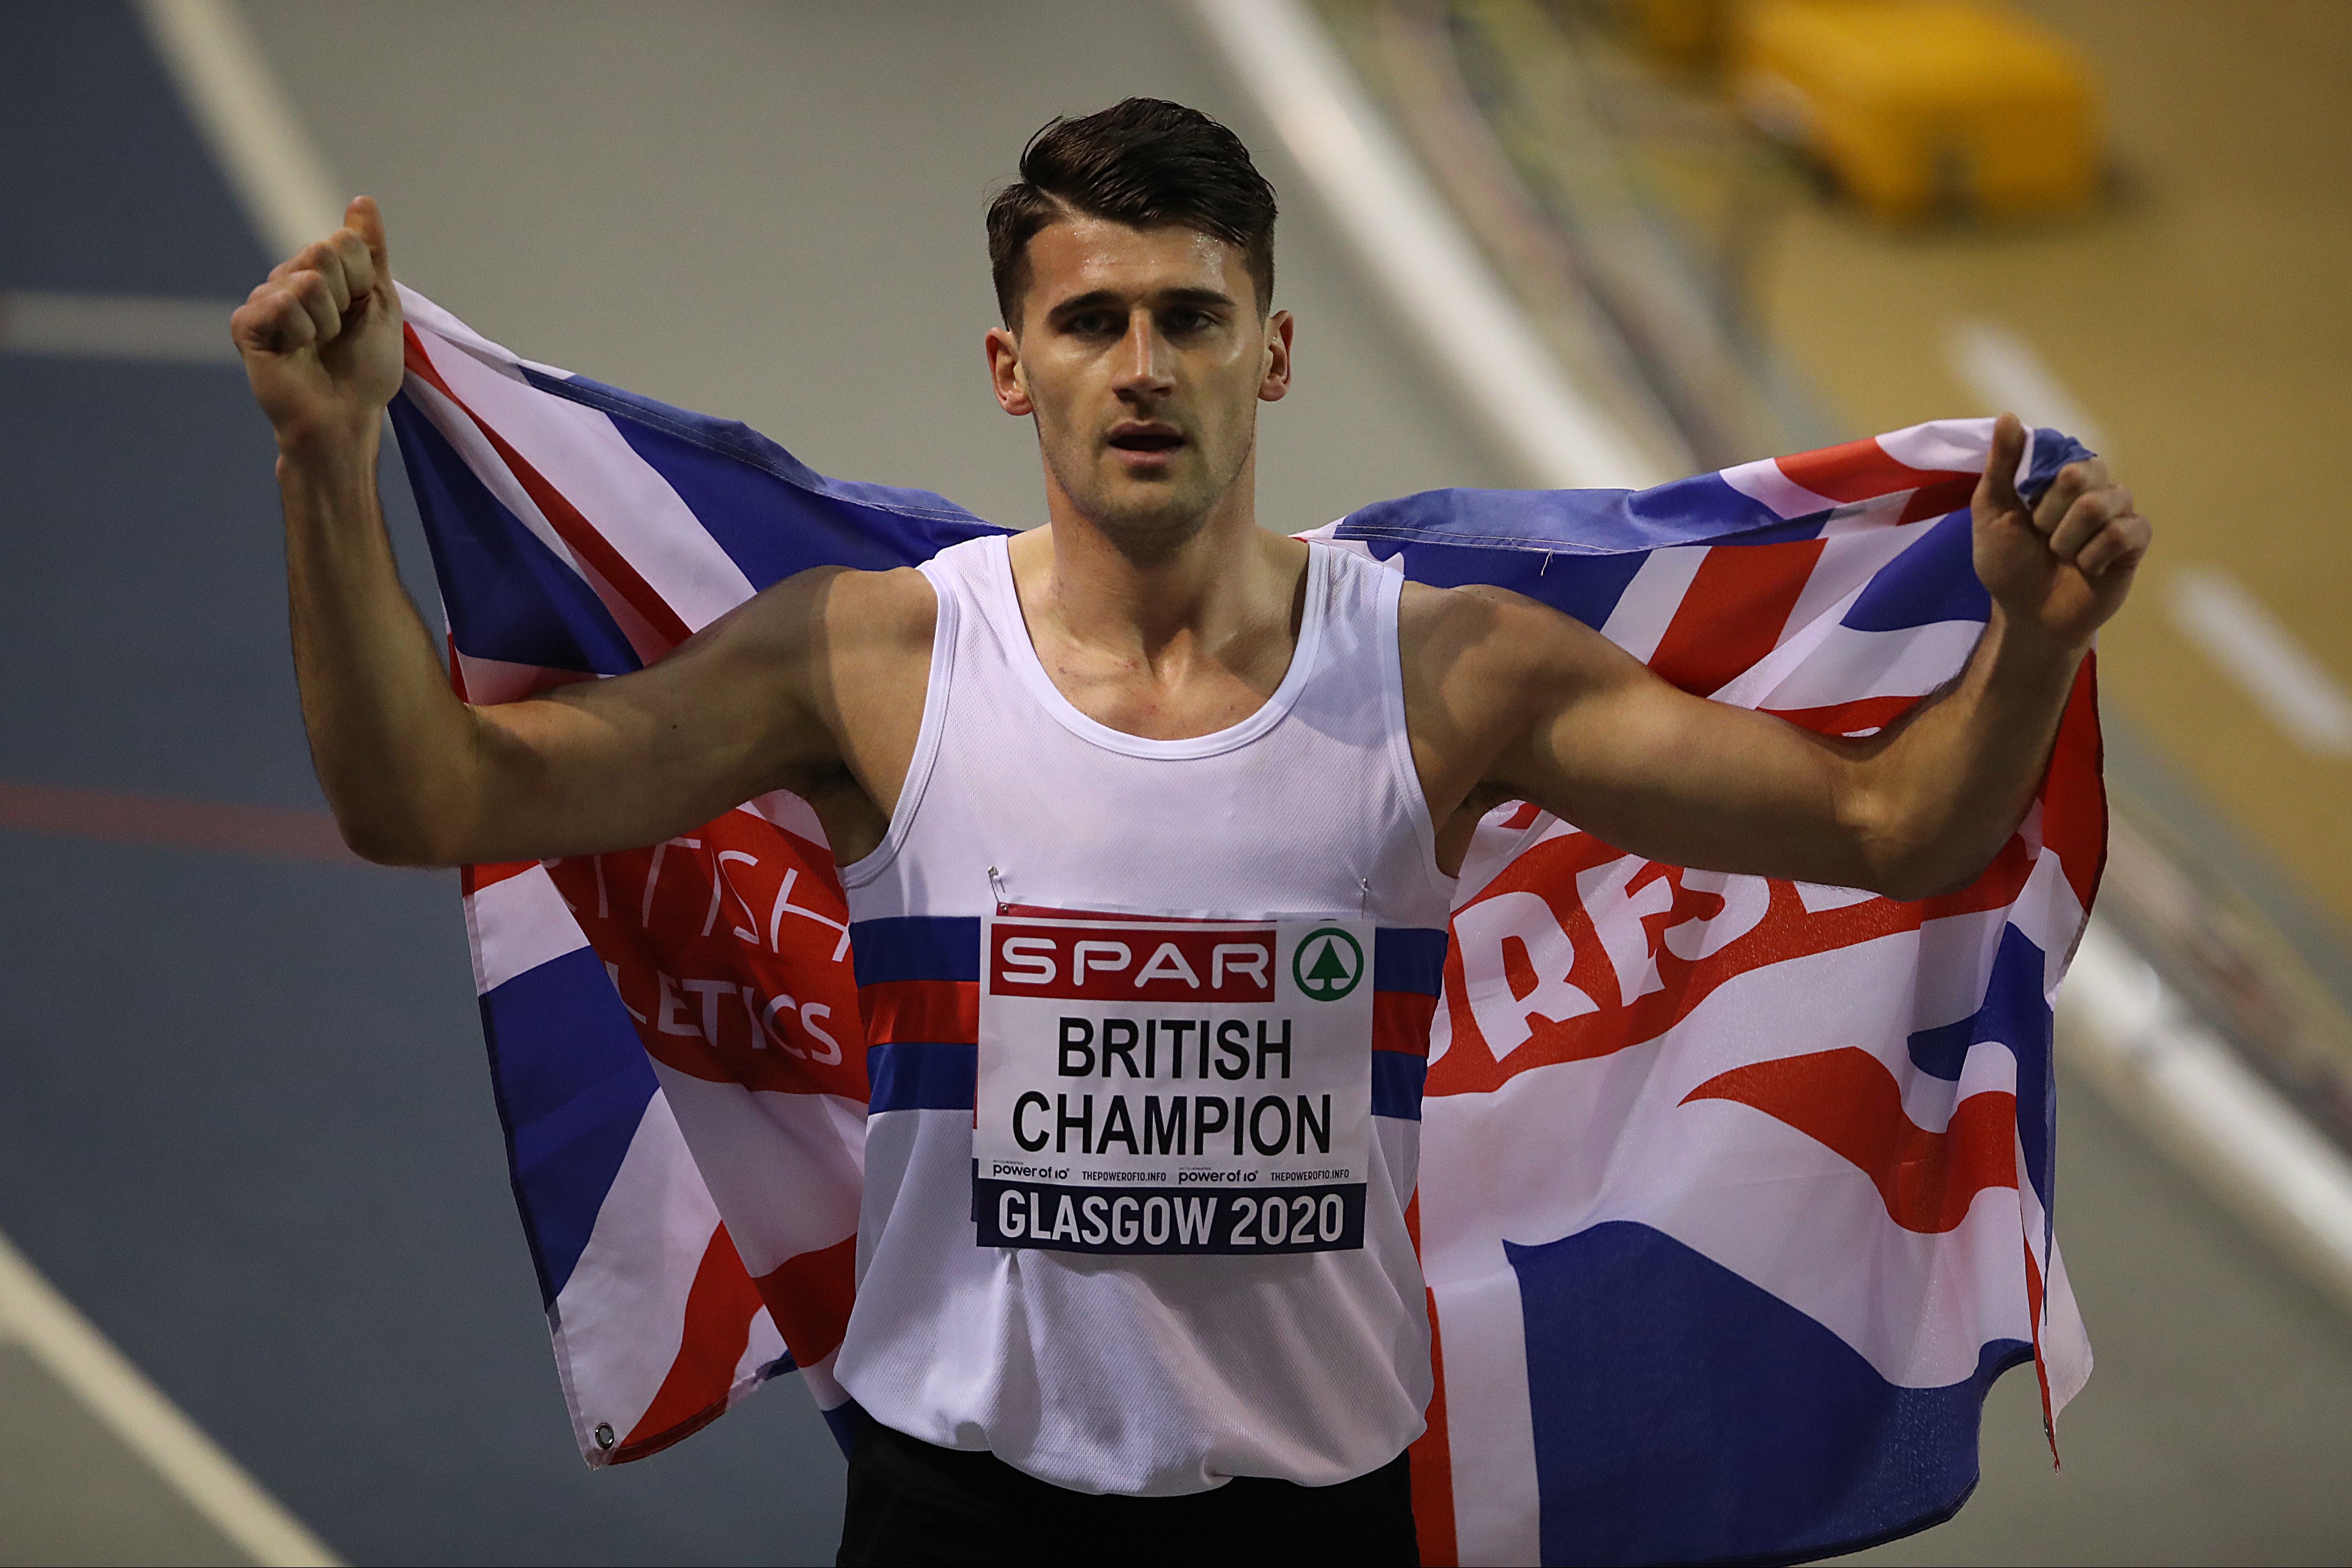 Guy Learmonth’s invite to the World Indoor Championships in Glasgow has been rejected